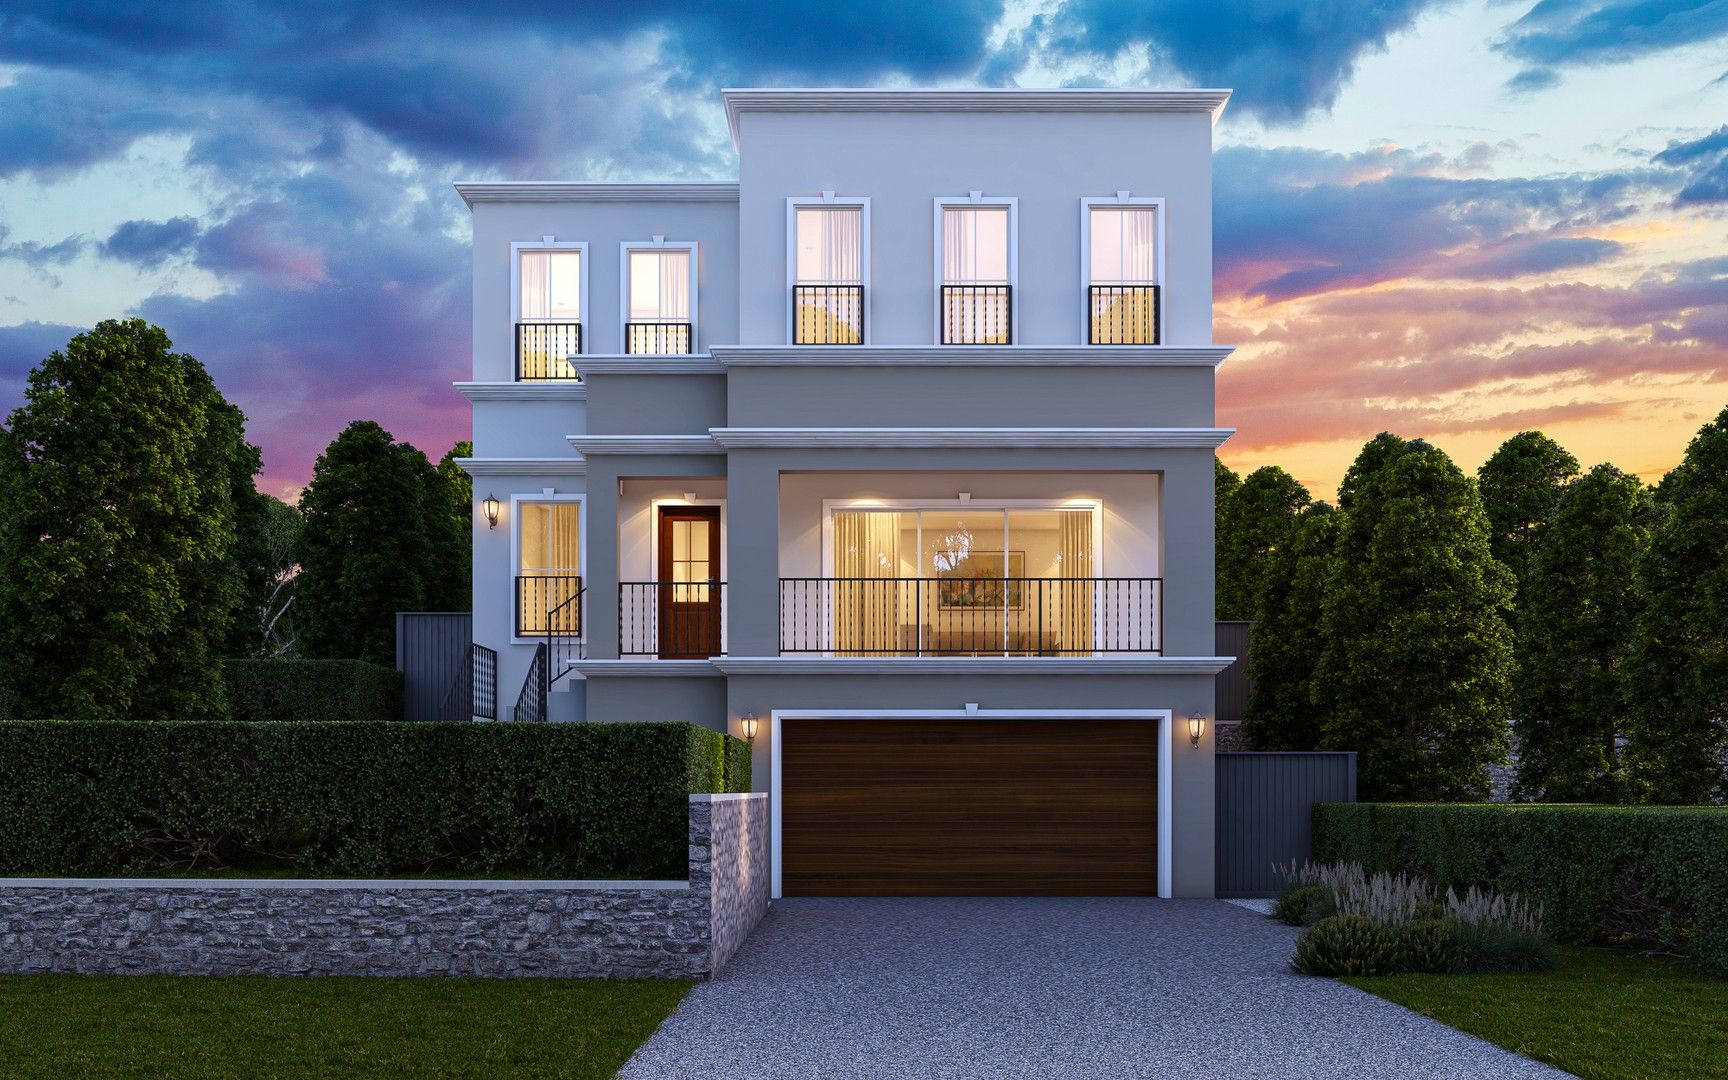 4 bedrooms House in DESIGNER FULL TURN K HOMES -CALL US TO VIEW DISPLAY FINISH KELLYVILLE NSW, 2155